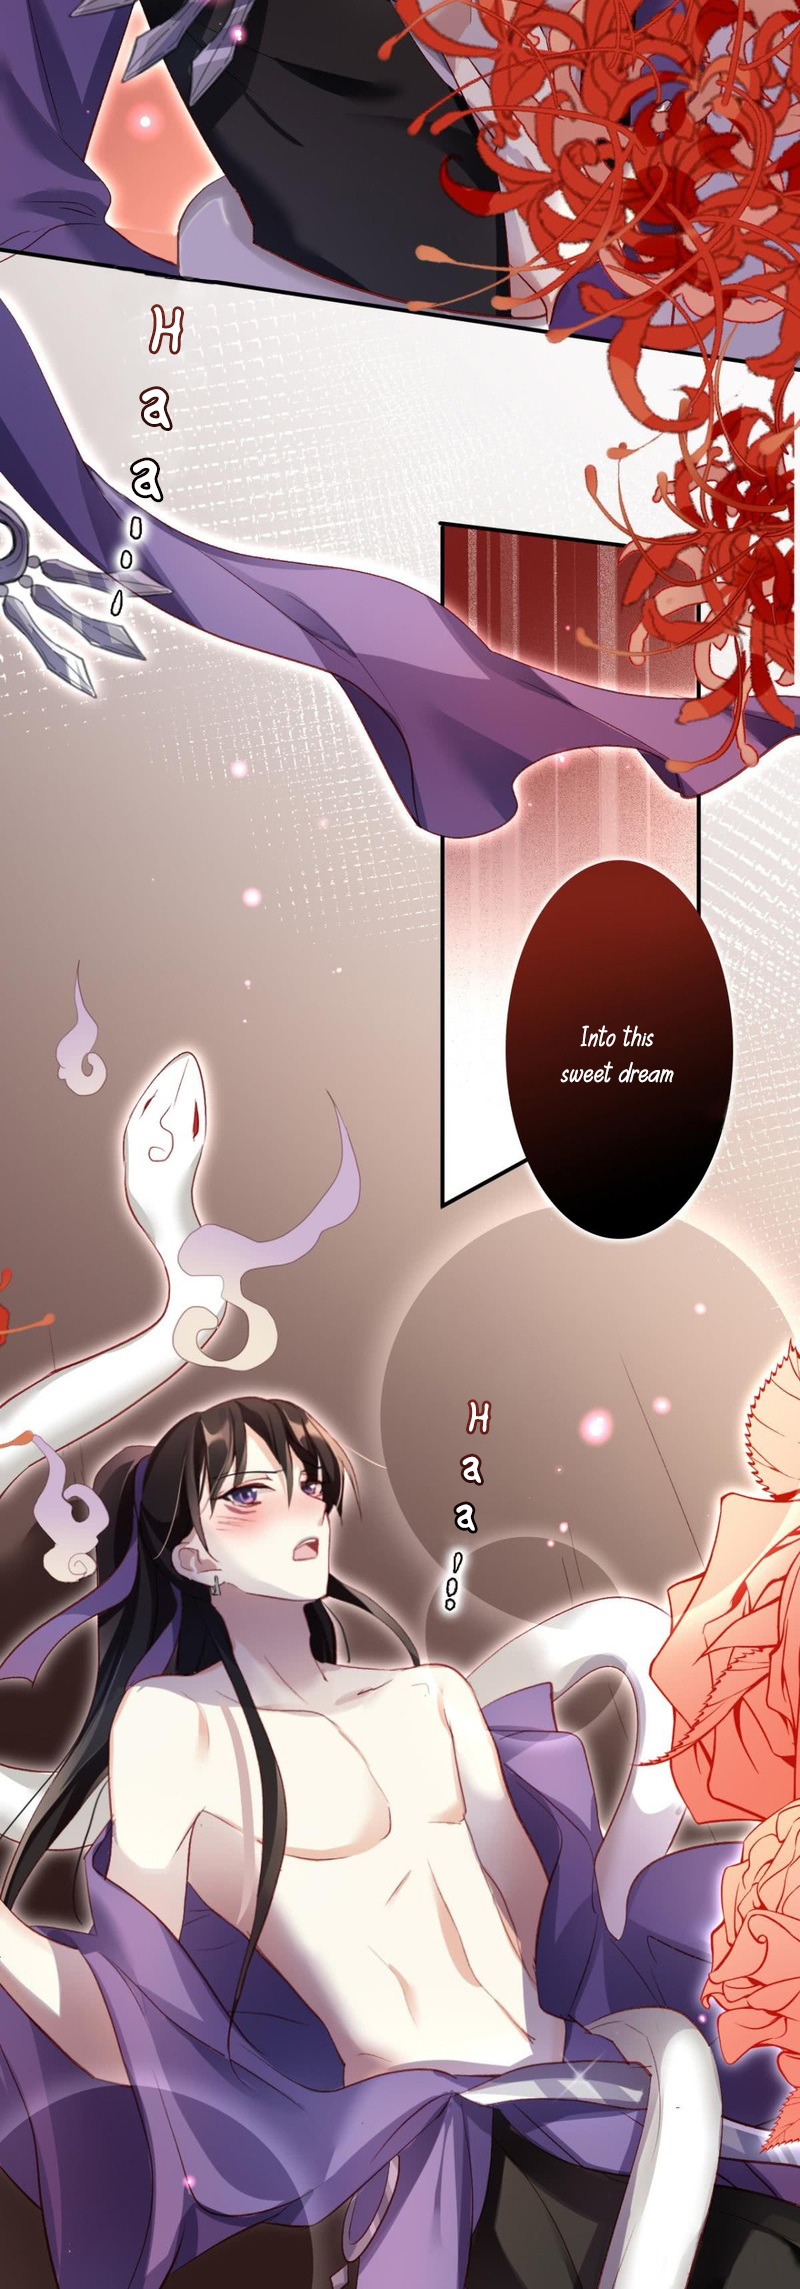 The Evil Girl is The Emperor Ch. 31 Possesed by The Soul Consuming Flower!